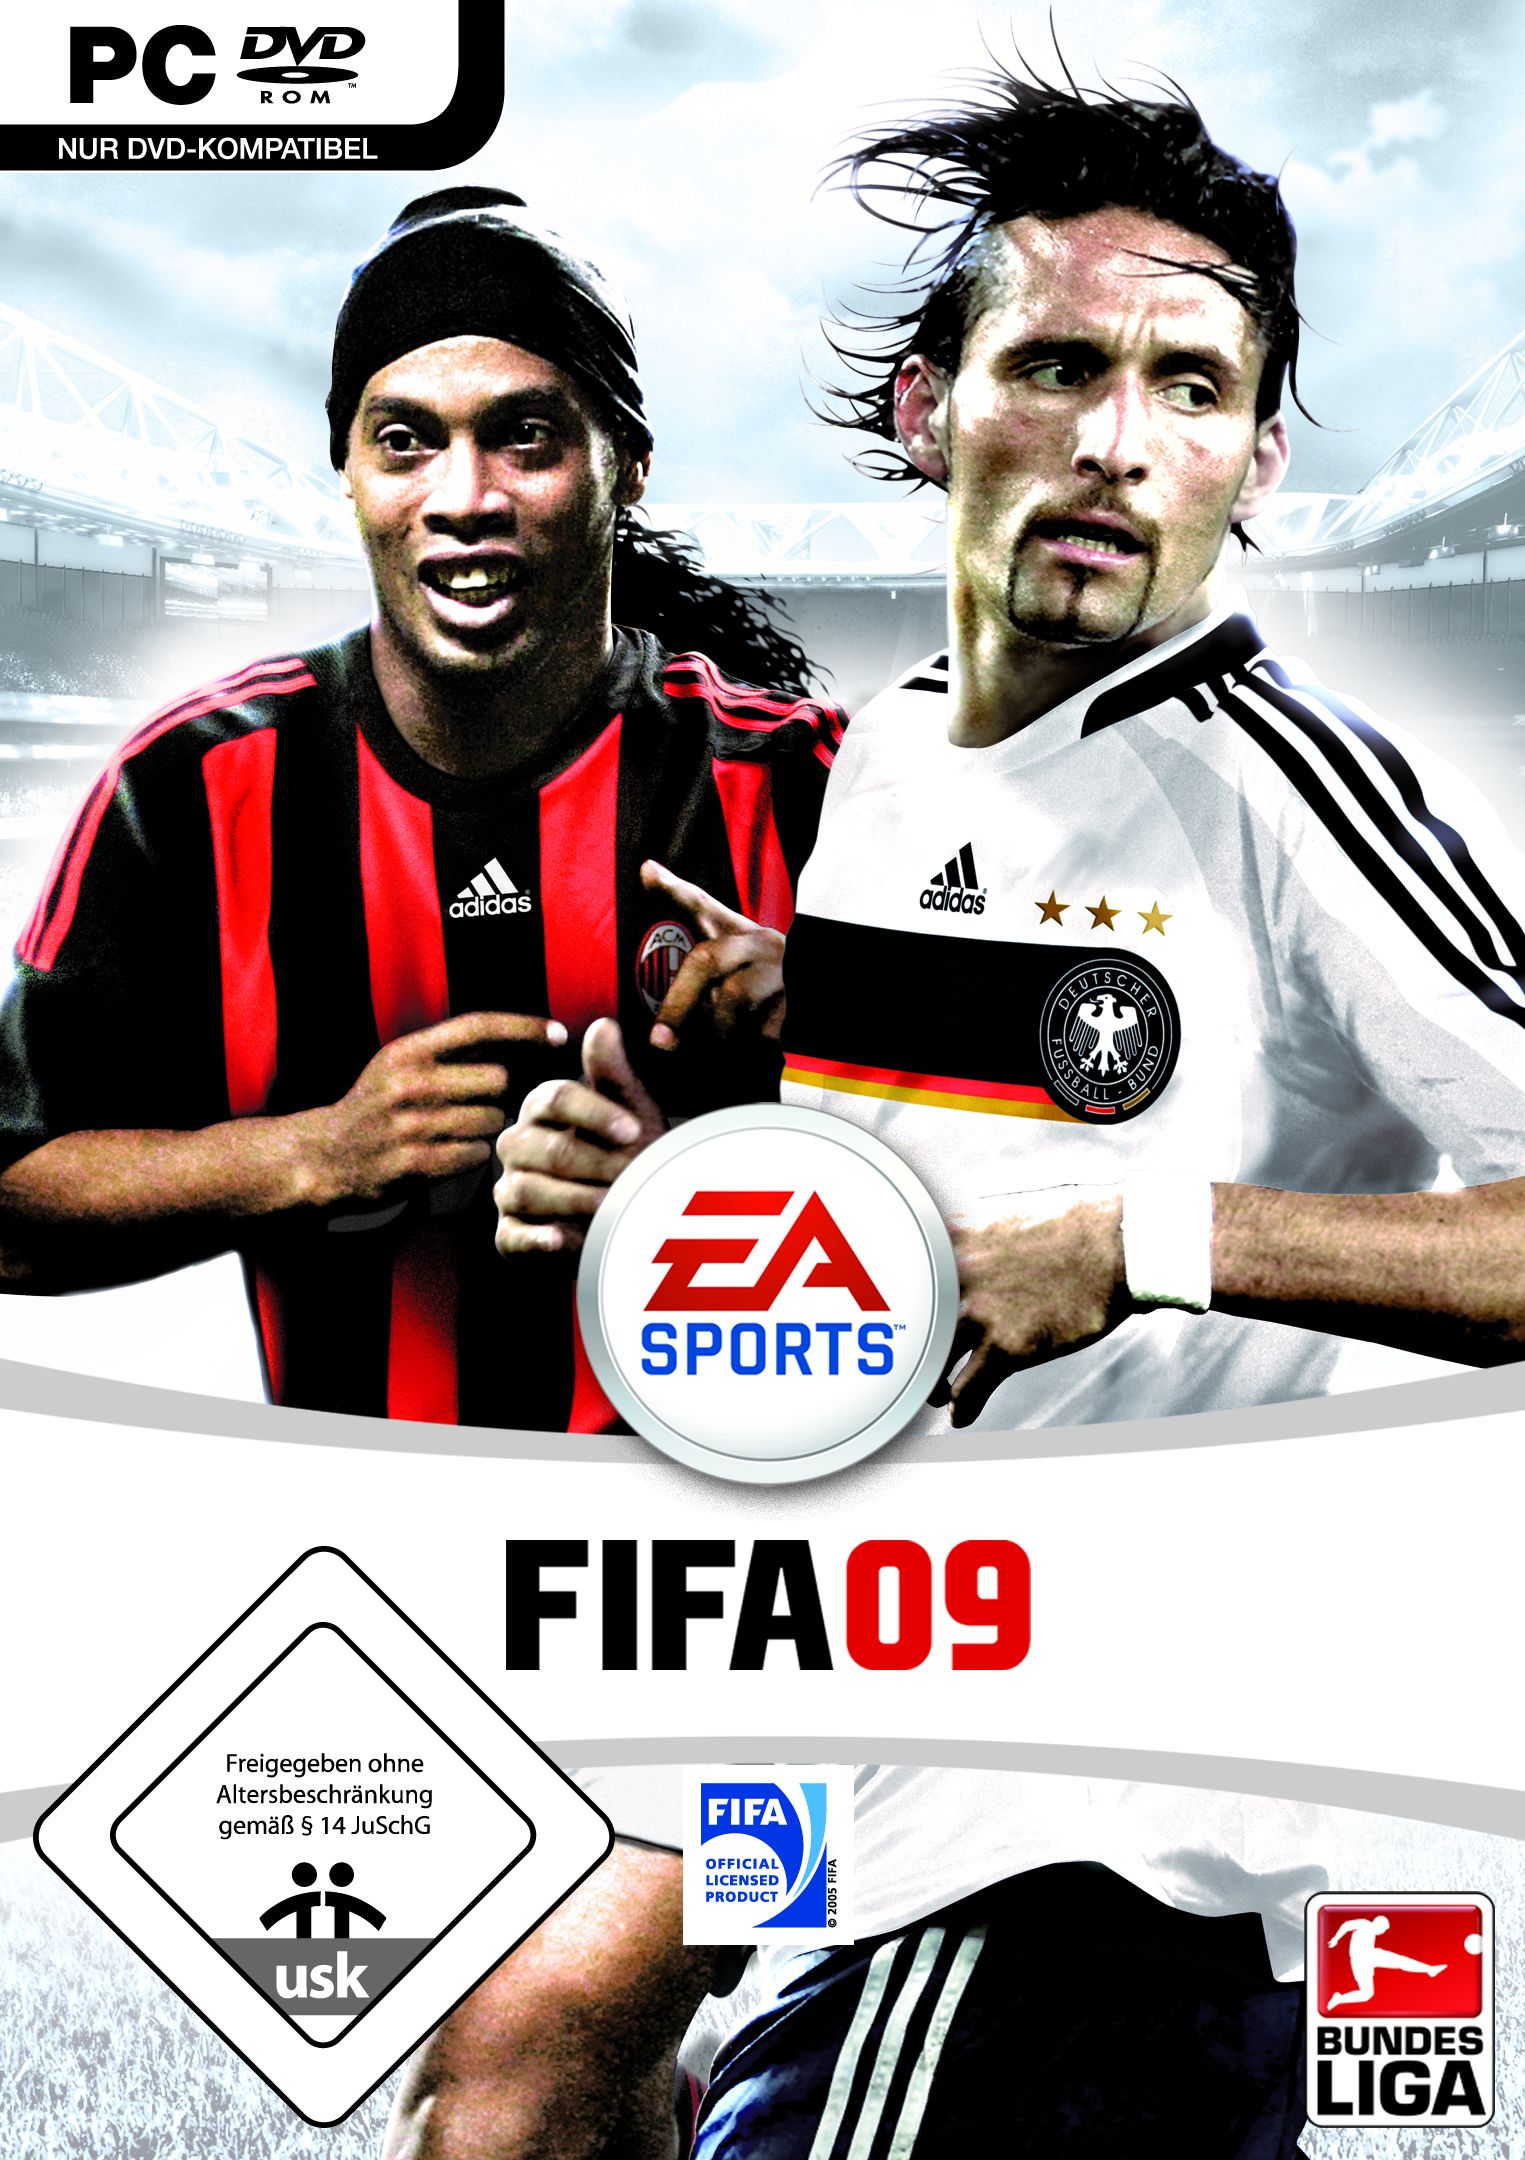 Free download game fifa 9 for pc windows 7